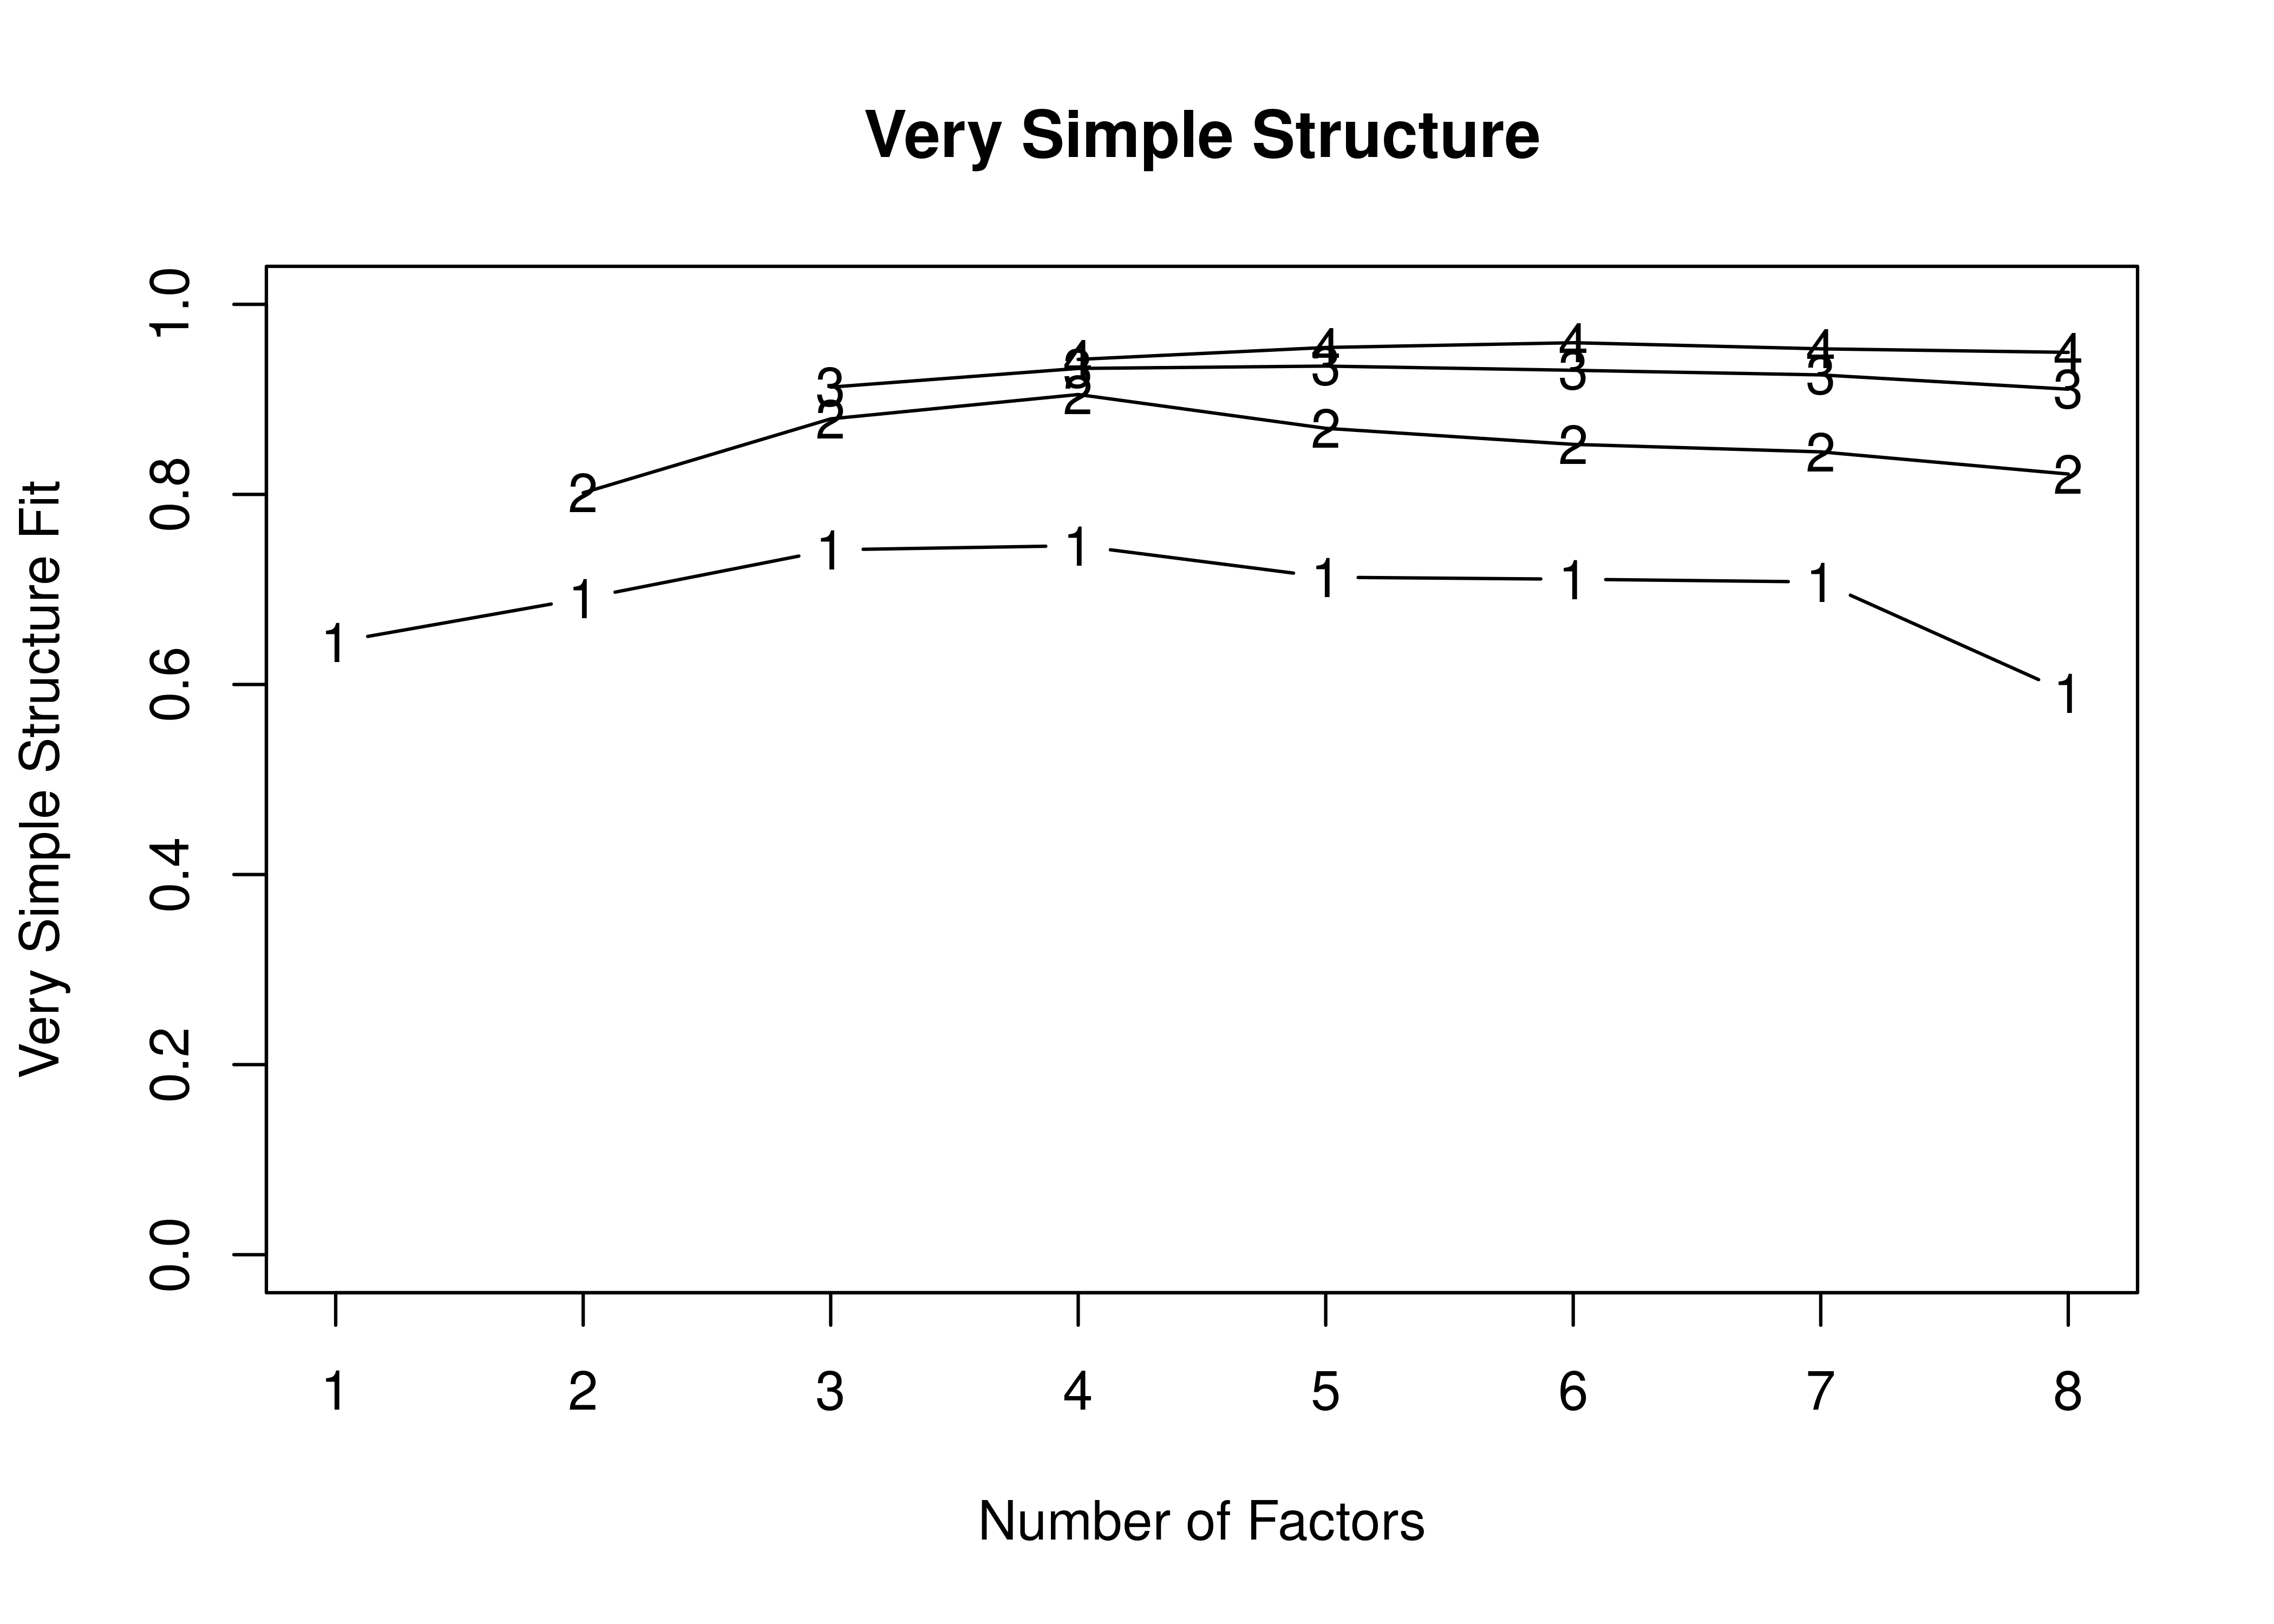 Very Simple Structure Plot With No Rotation in Principal Component Analysis.